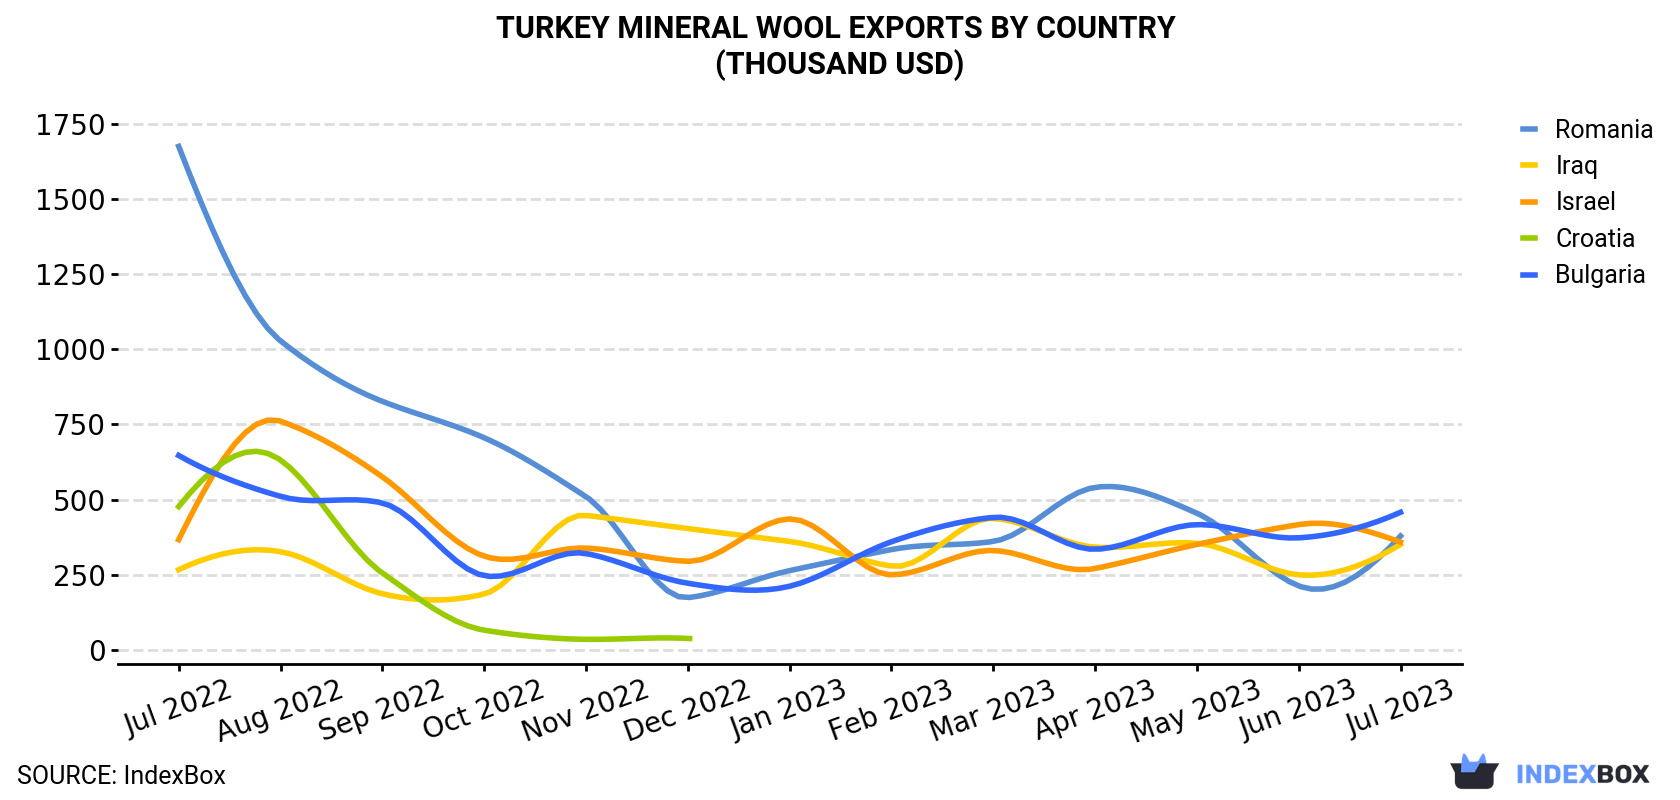 Turkey Mineral Wool Exports By Country (Thousand USD)